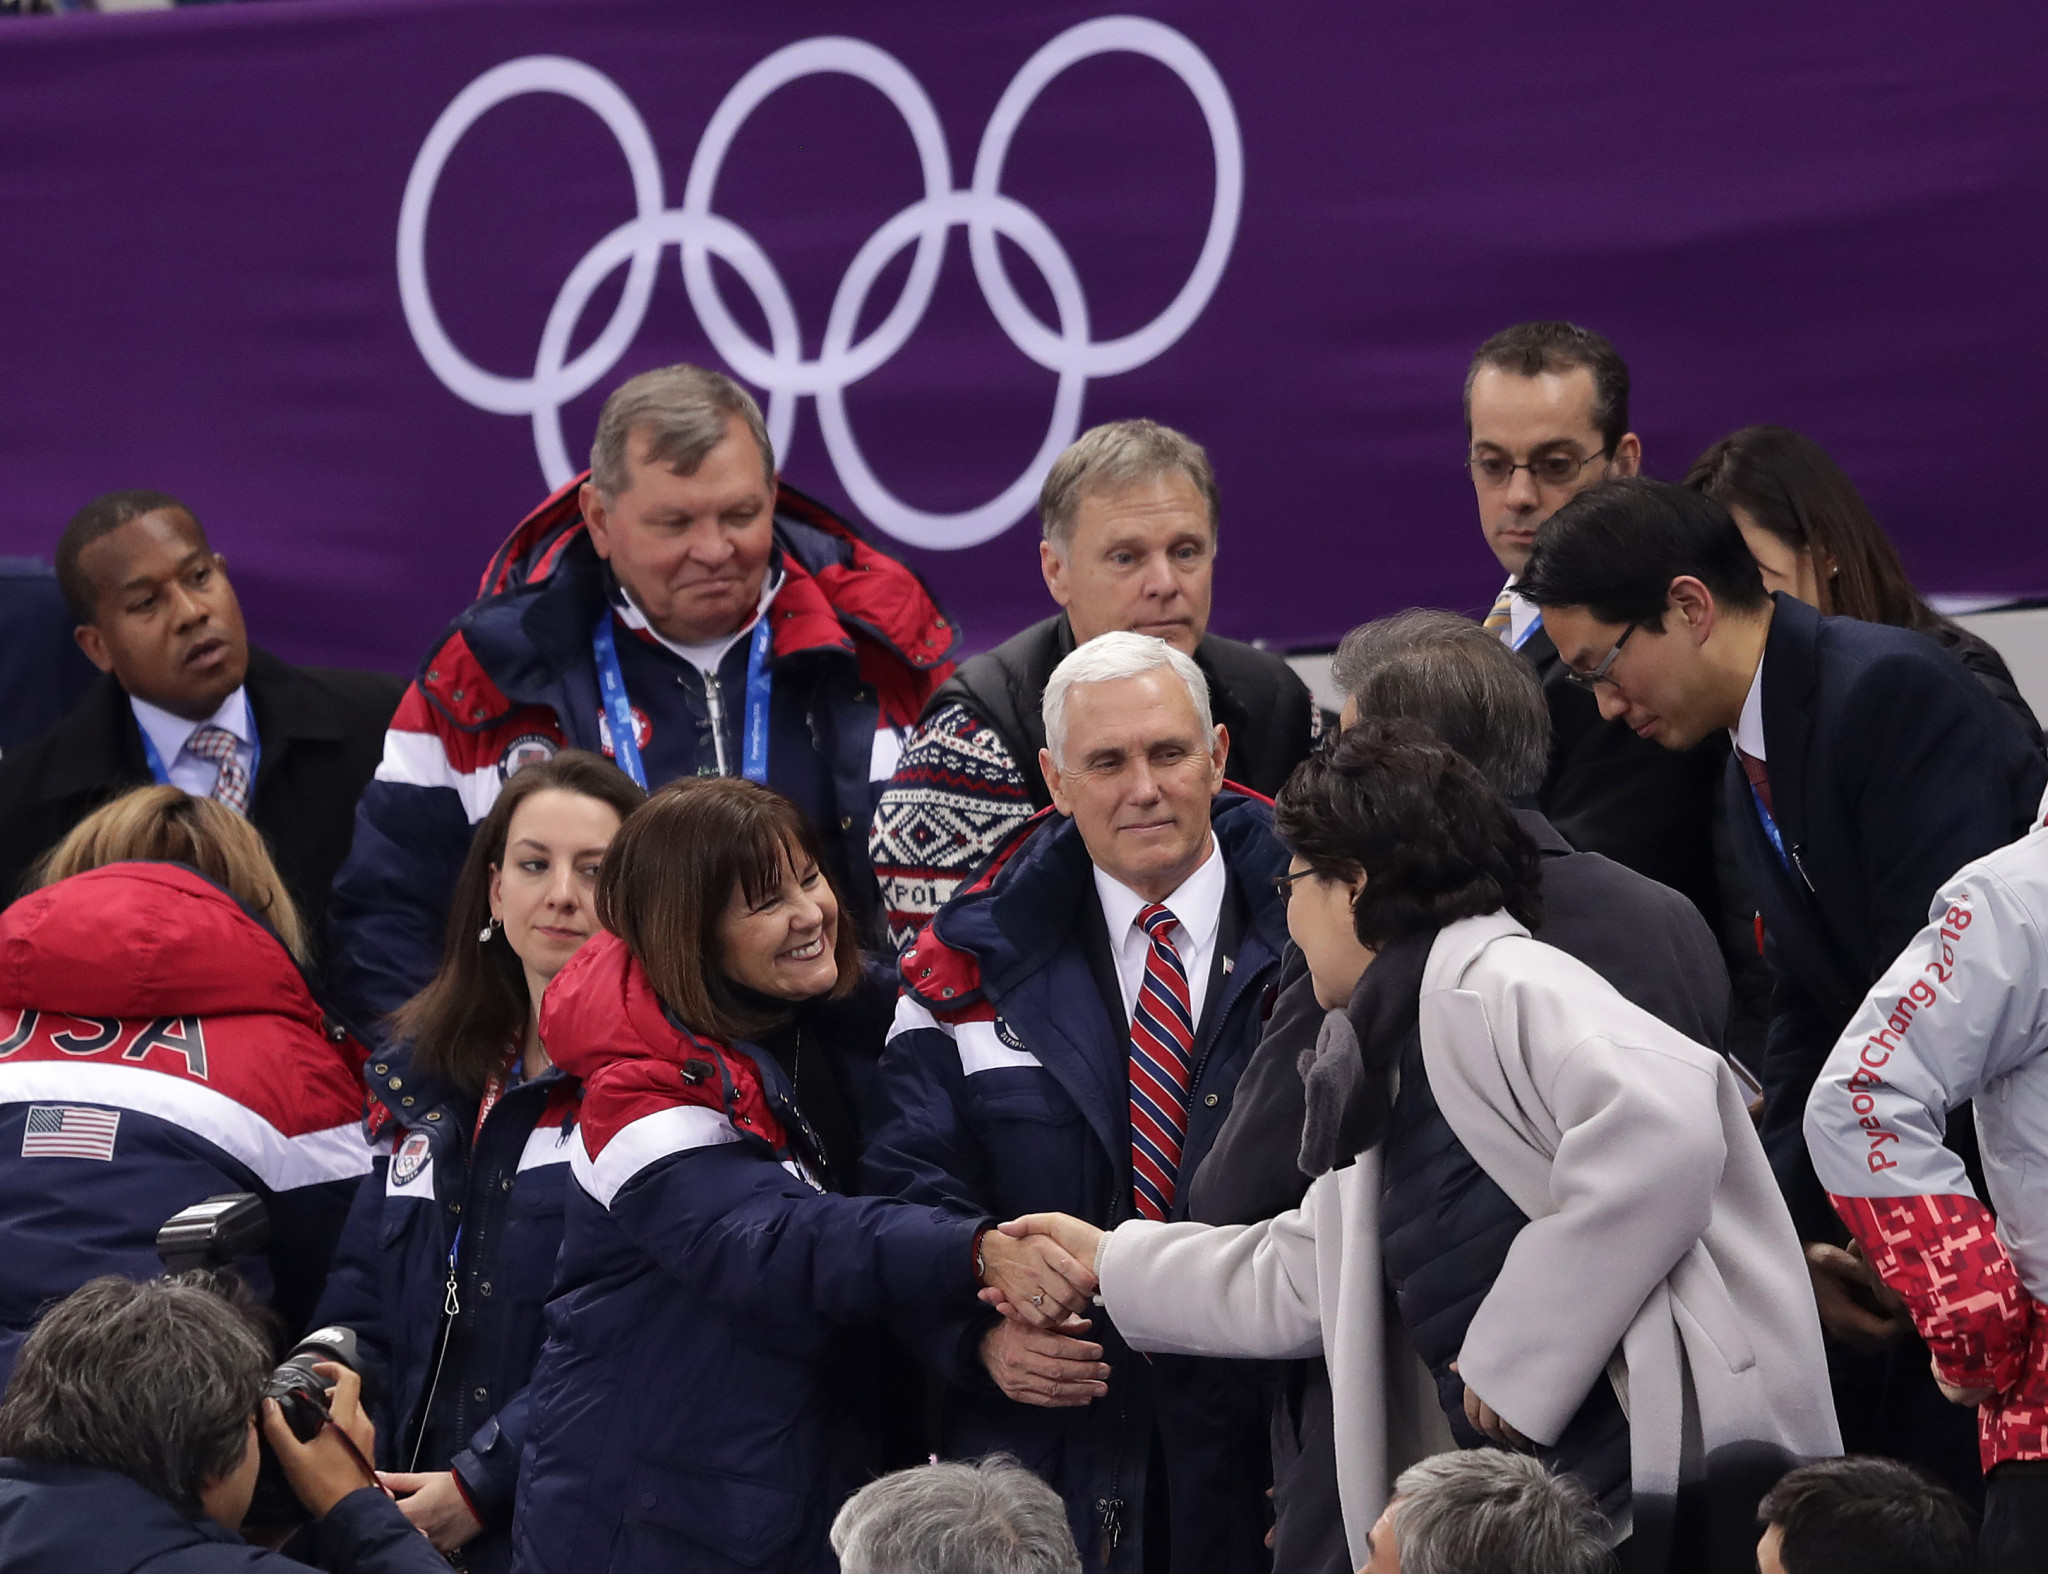 Mike Pence headed the US delegation at the Opening Ceremony of Pyeongchang 2018 ©Getty Images